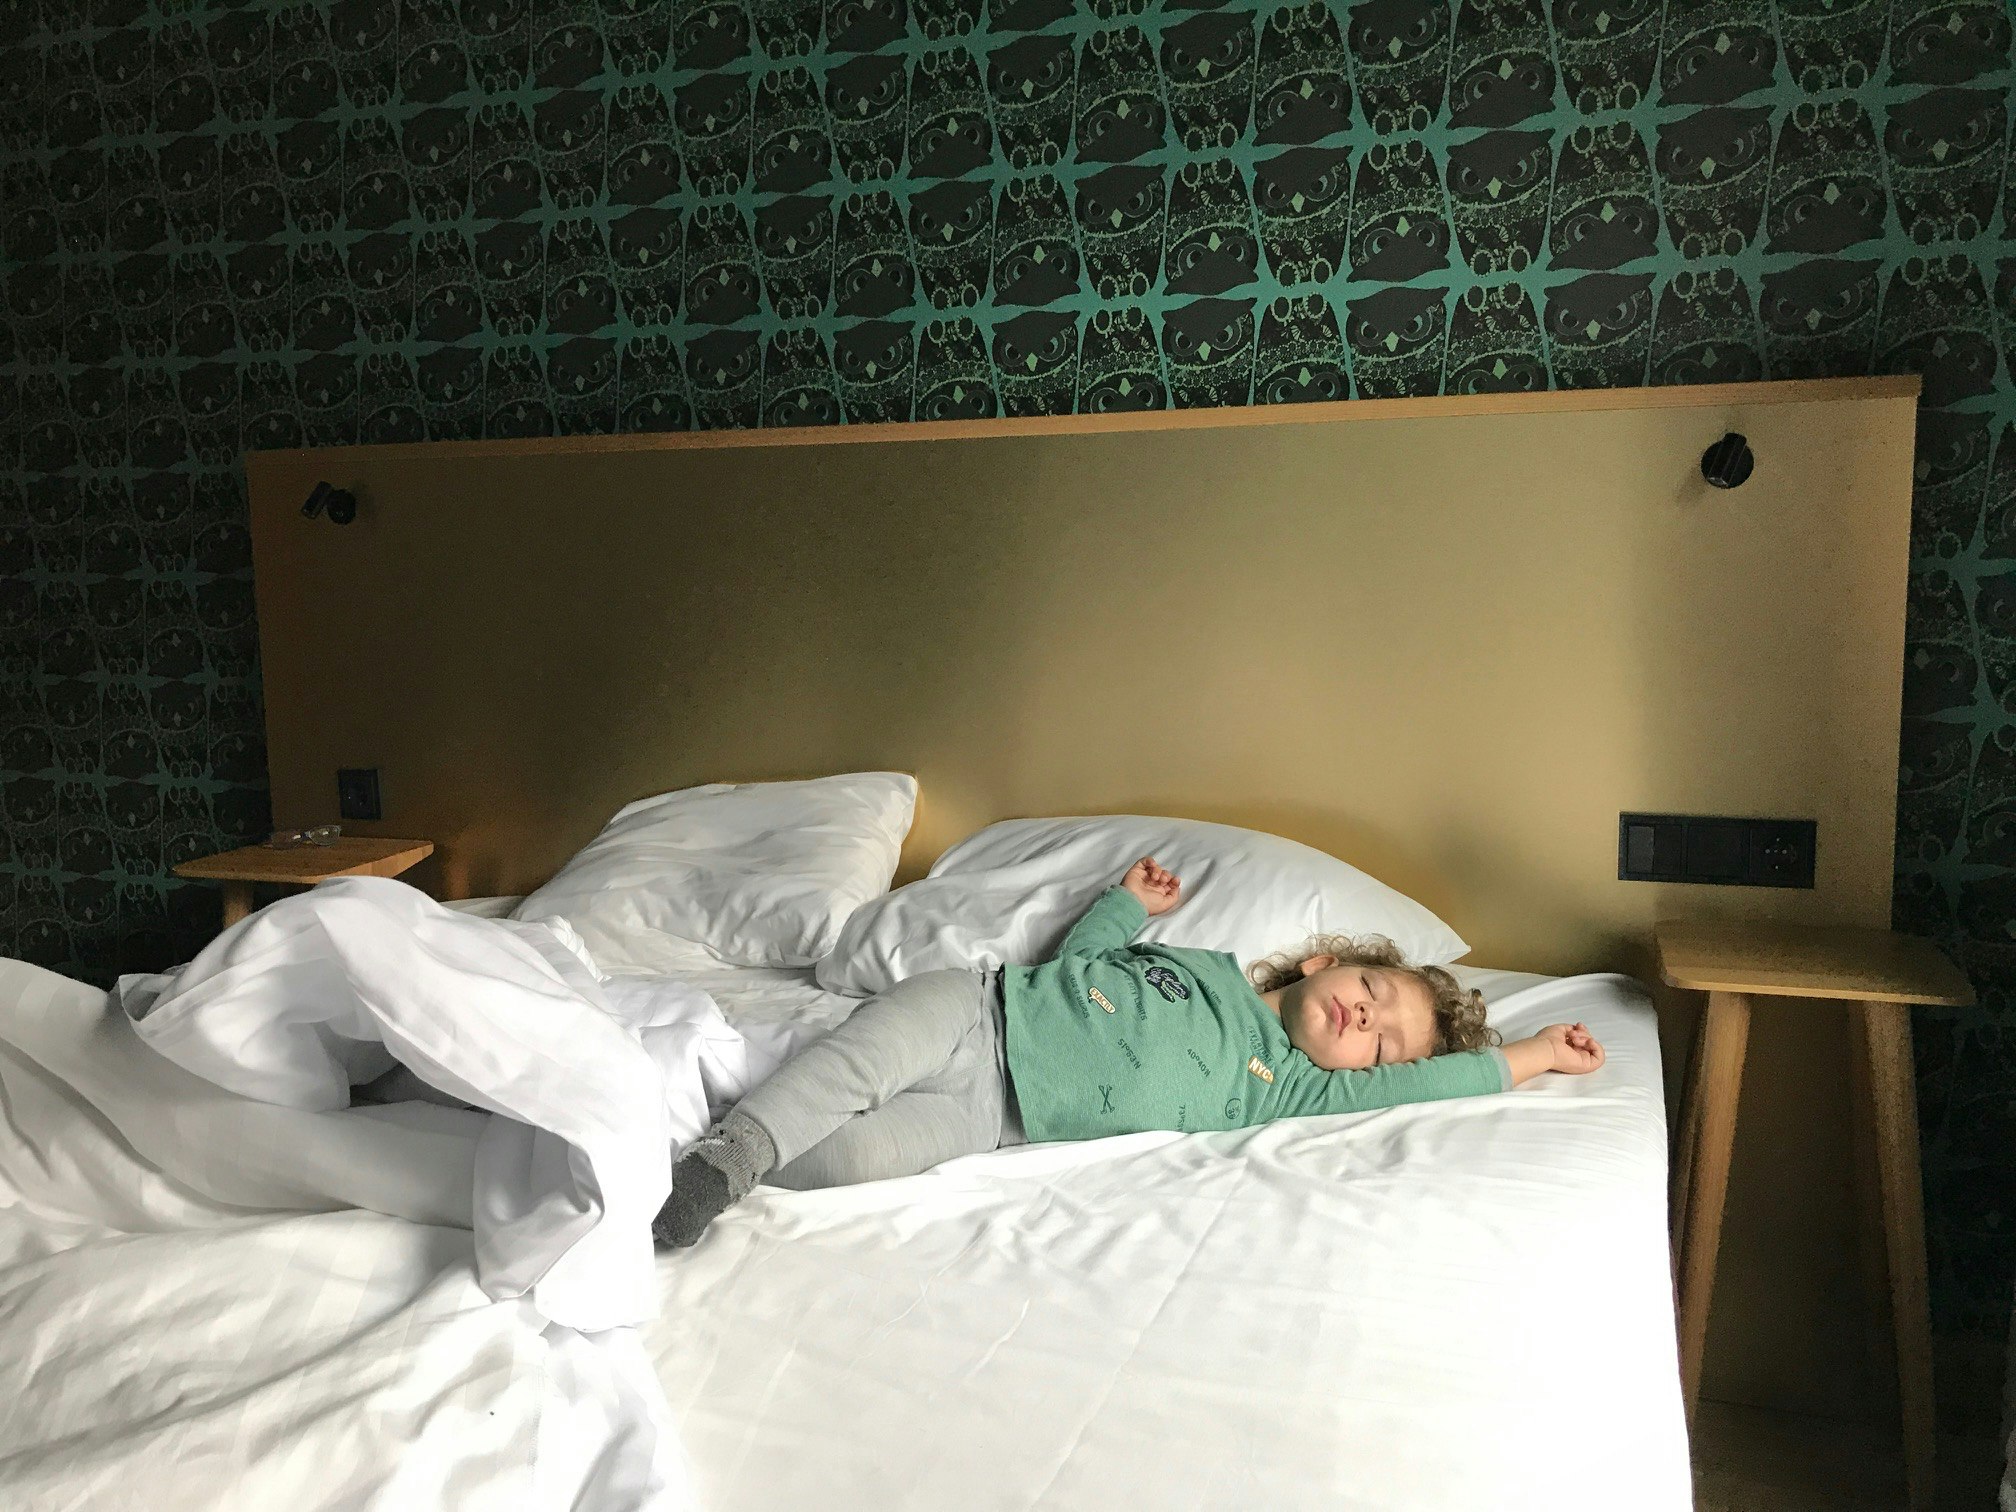 A child sleeps sprawled out in a hotel bed.